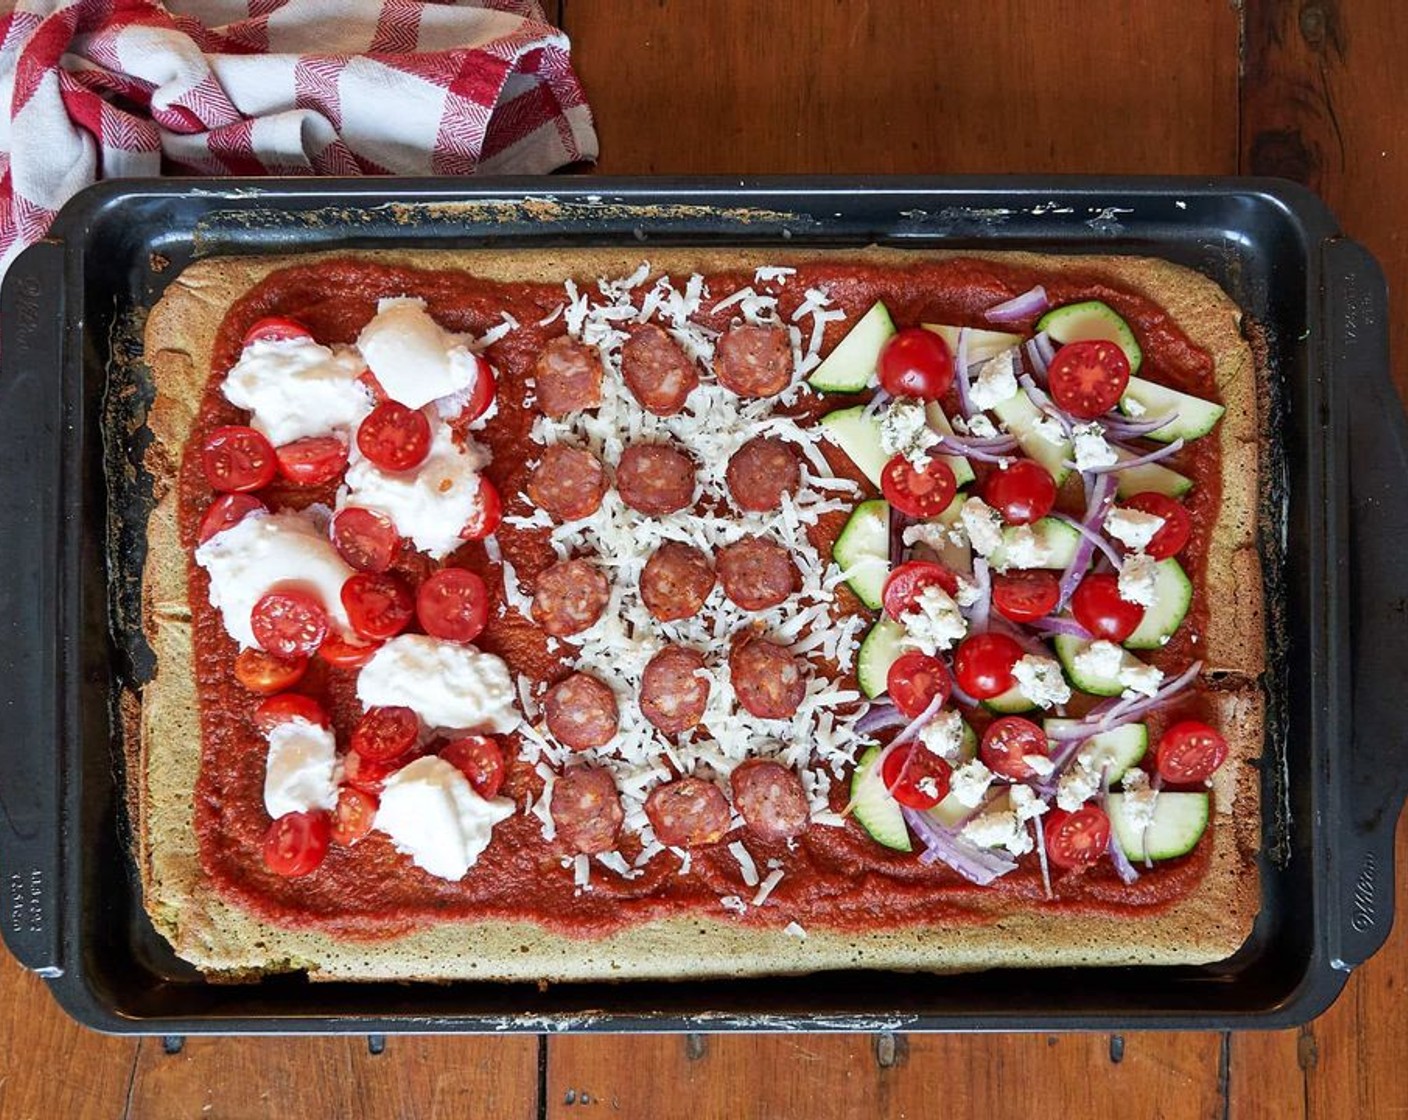 step 6 Top the crust with your favorite toppings and then put back in the oven for another 10 minutes.